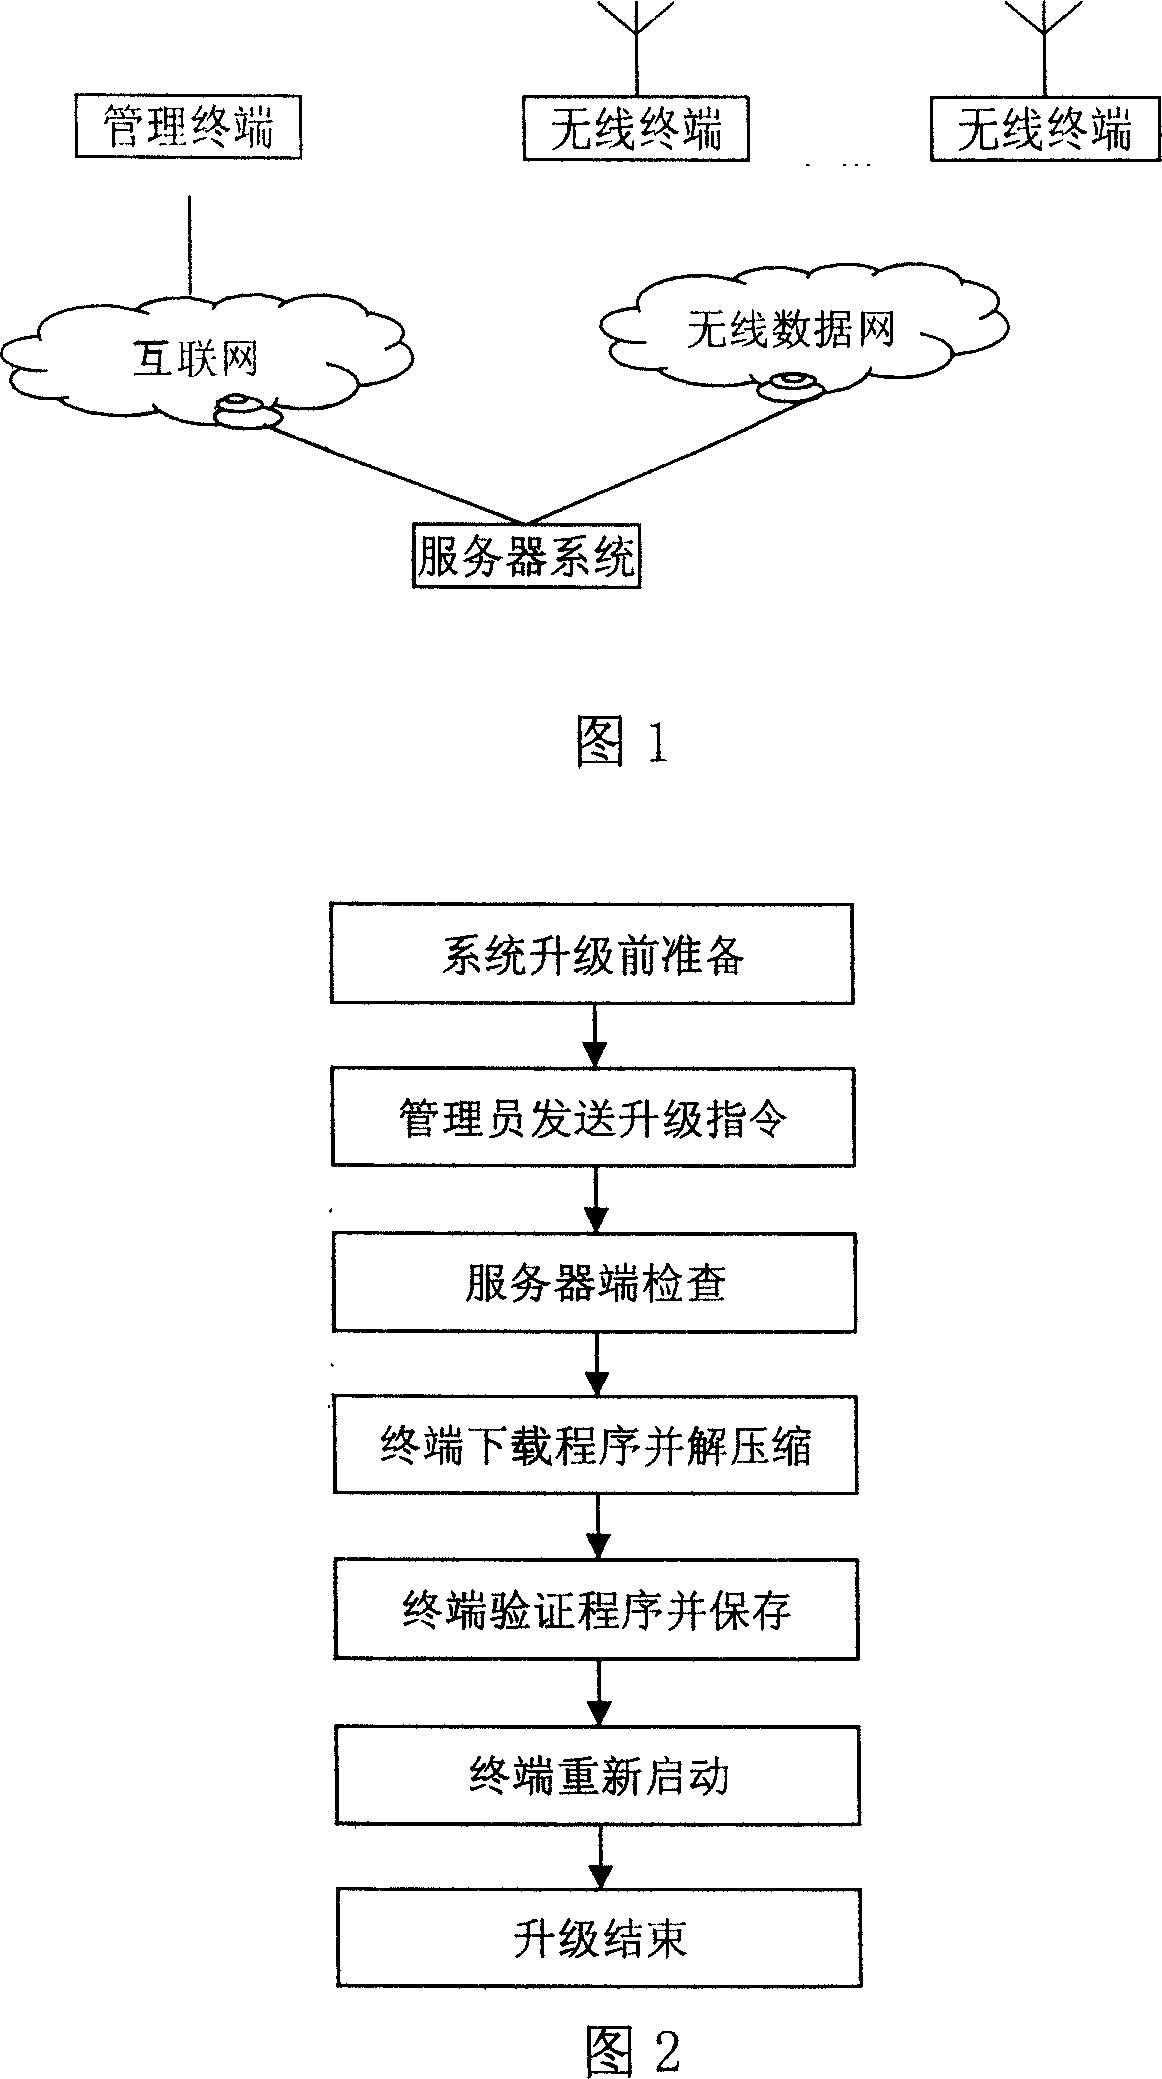 A system and method for updating remote software of wireless terminal equipment